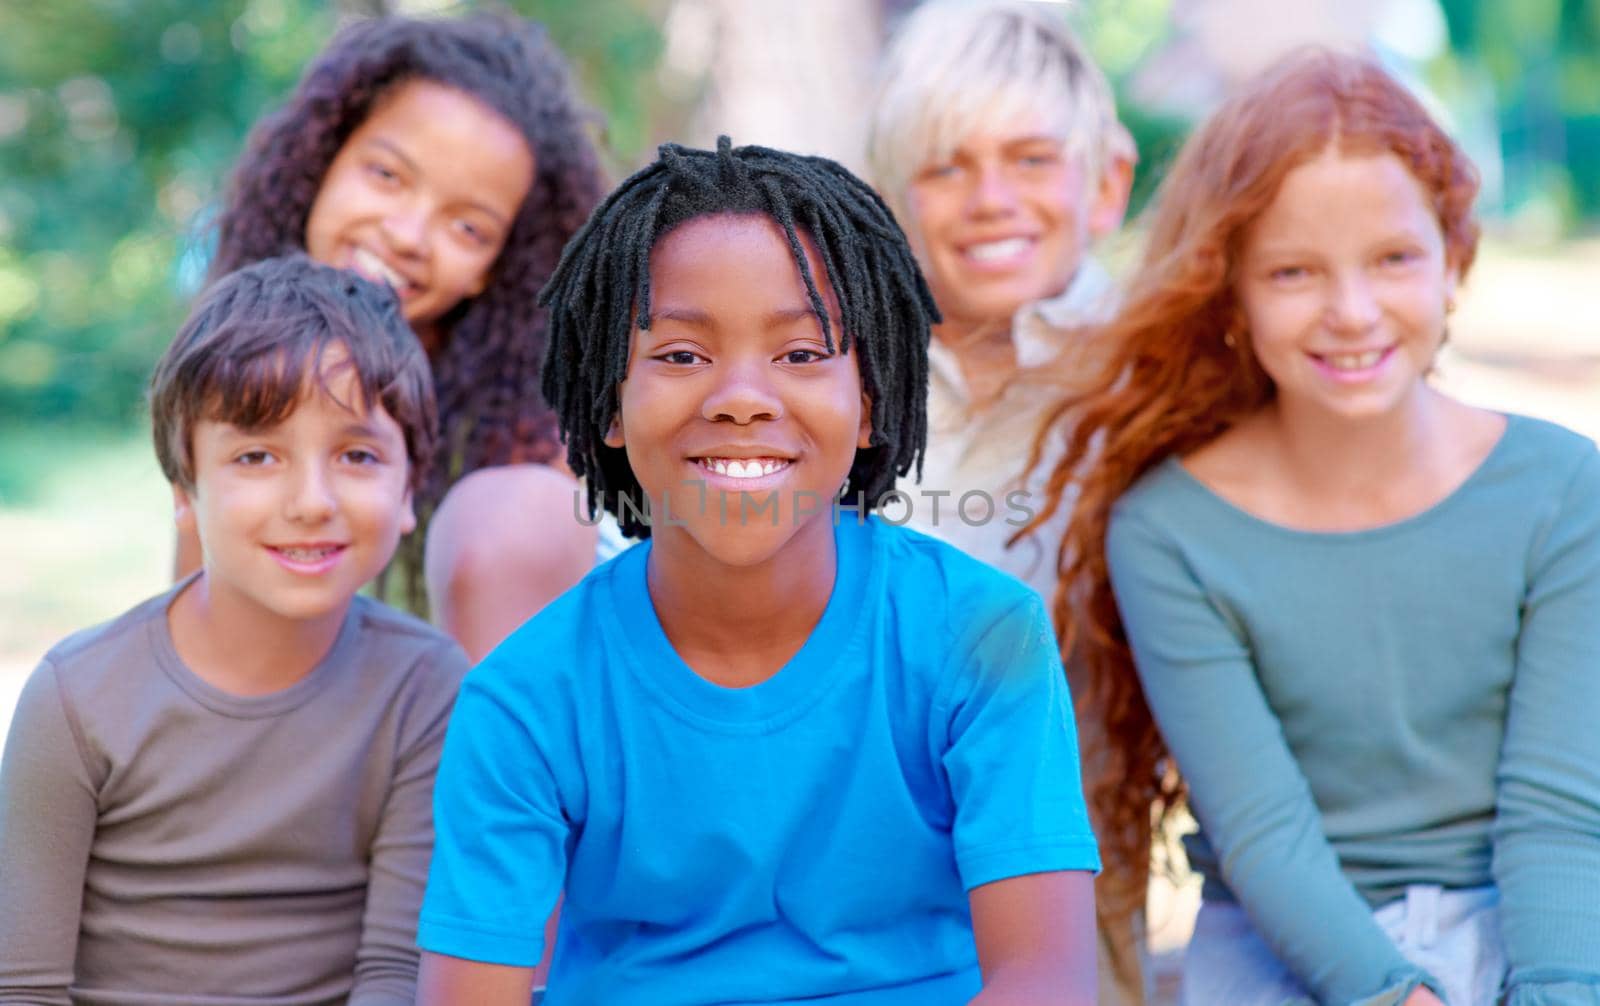 A group of children smiling at the camera in the outdoors.